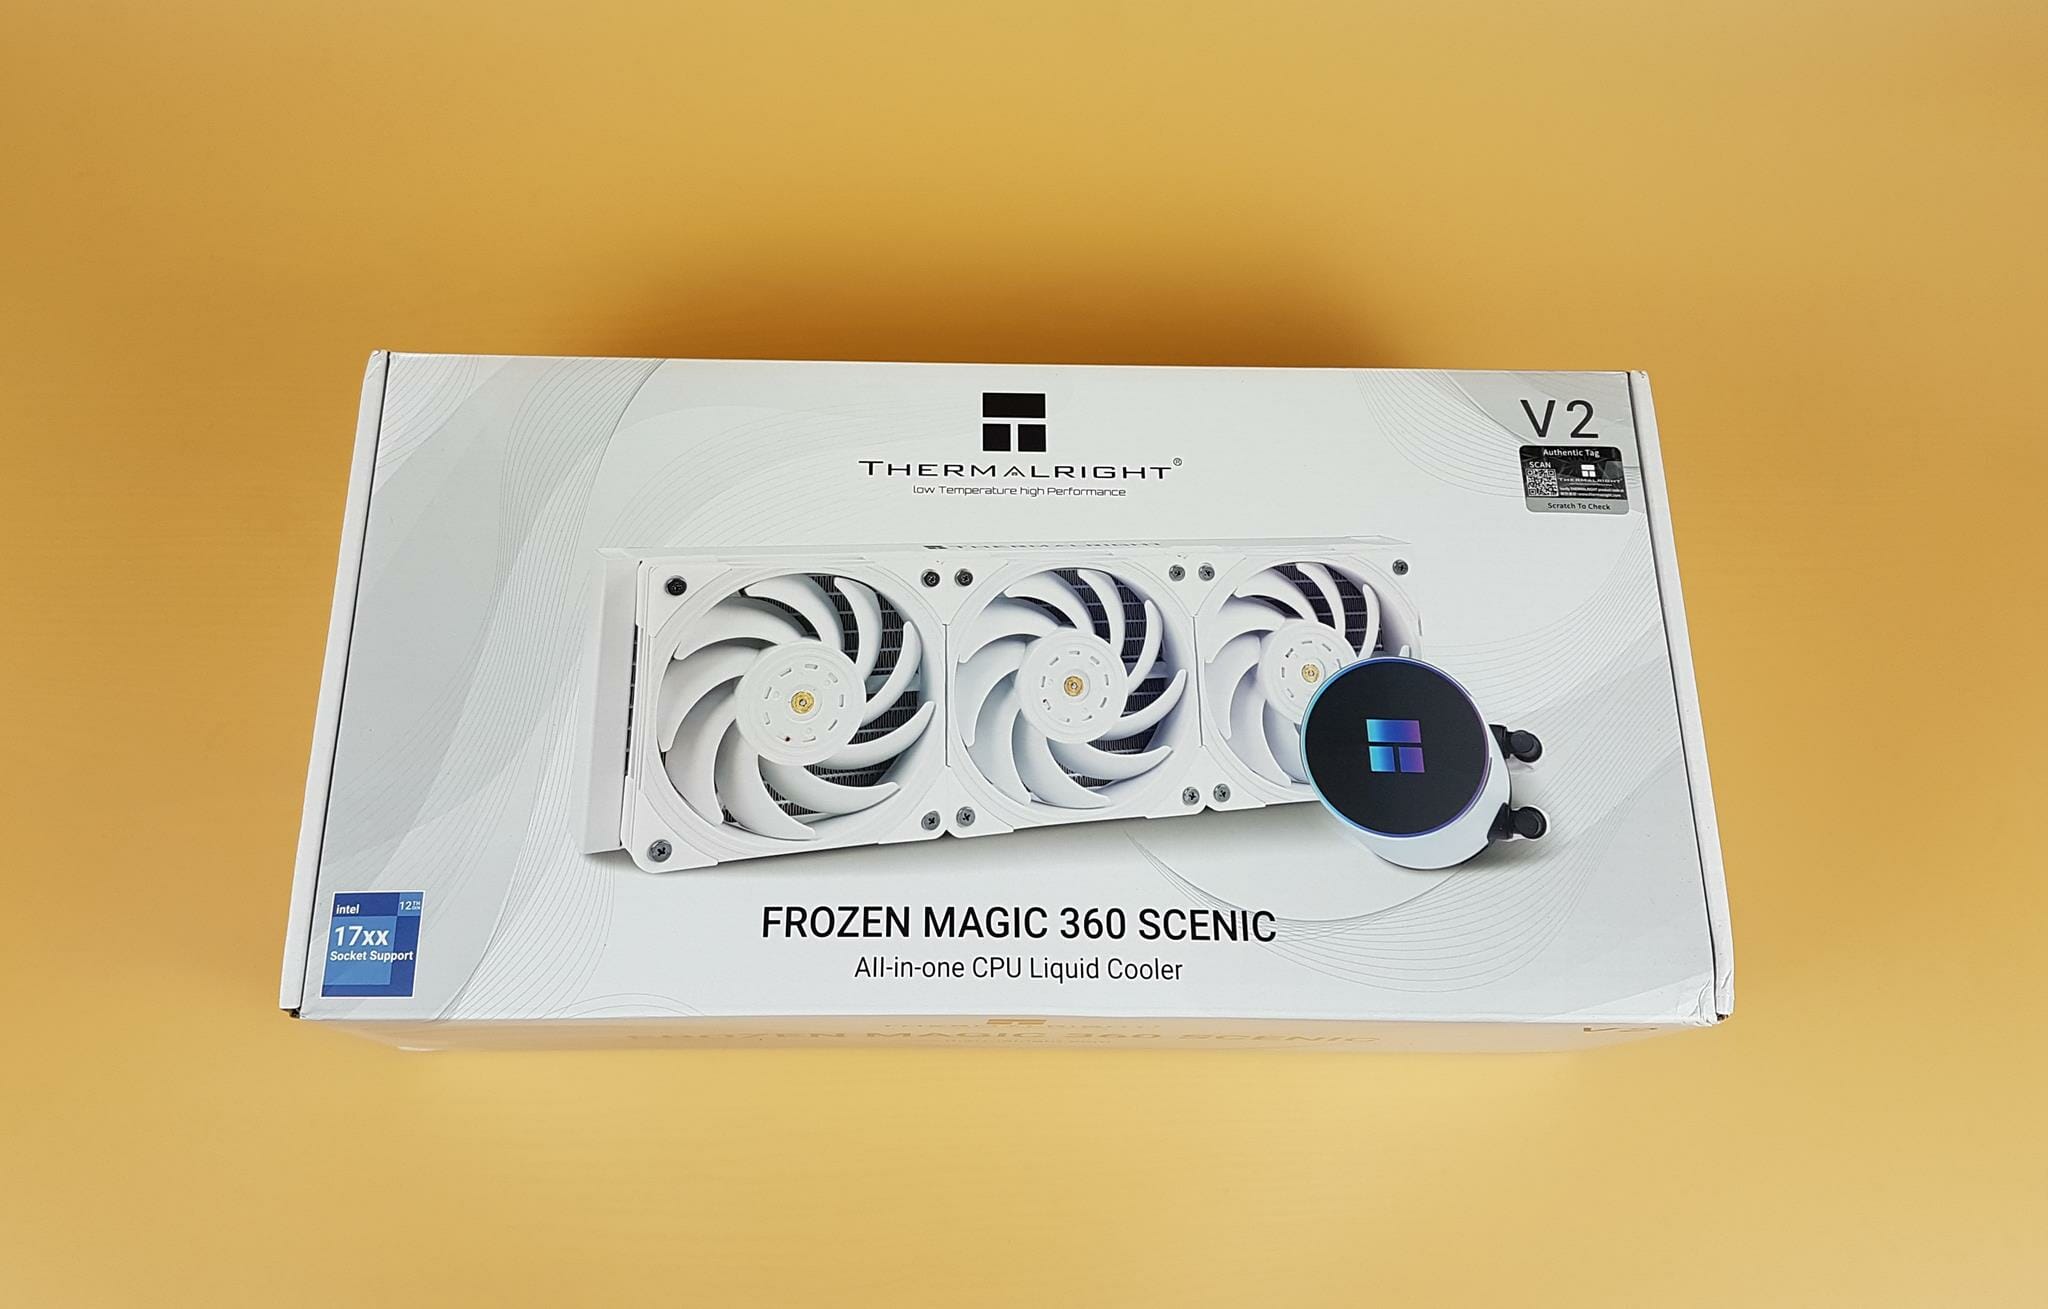 Thermalright Frozen Magic 360 Scenic Packing Box 1